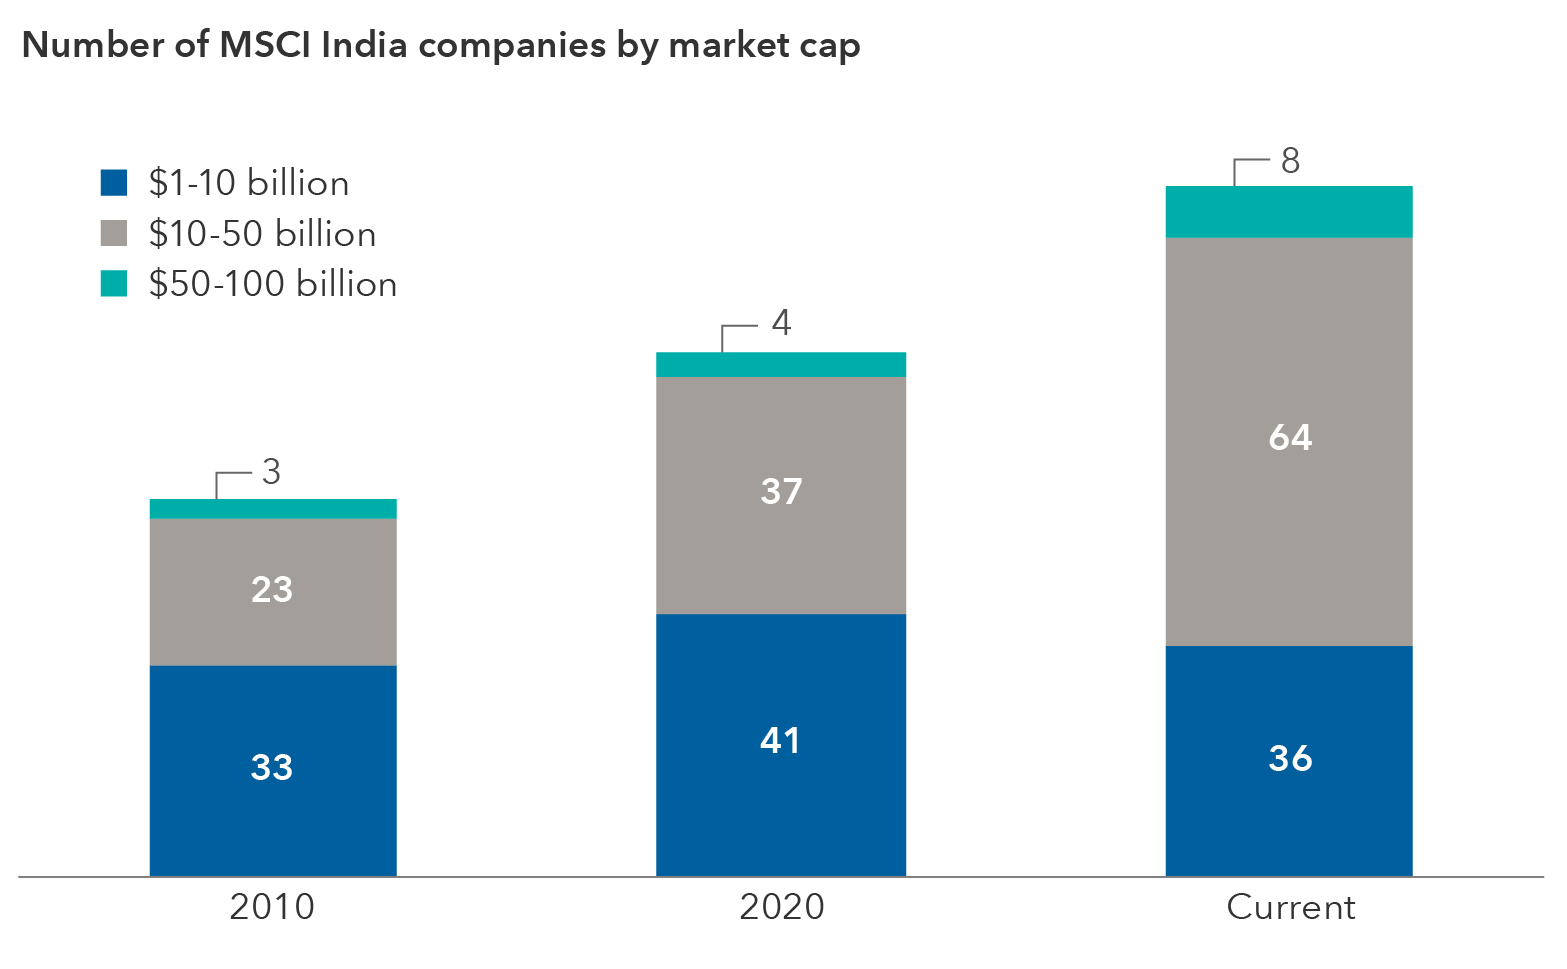 Chart breaks down companies in the MSCI India Index by market value. The number of companies whose market value was between $1 billion and $10 billion rose from 33 as of December 31, 2010, to 41, as of December 31, 2020. The number of companies was 36 as of February 28, 2024. The number of companies whose market value was between $10 billion and $50 billion rose from 23 as of December 31, 2010, to 37 as of December 31, 2020, to 64 as of February 28, 2024. The number of companies whose market value was between $50 billion and $100 billion rose from three as of December 31, 2010, to four as of December 31, 2020, to eight as of February 28, 2024. 